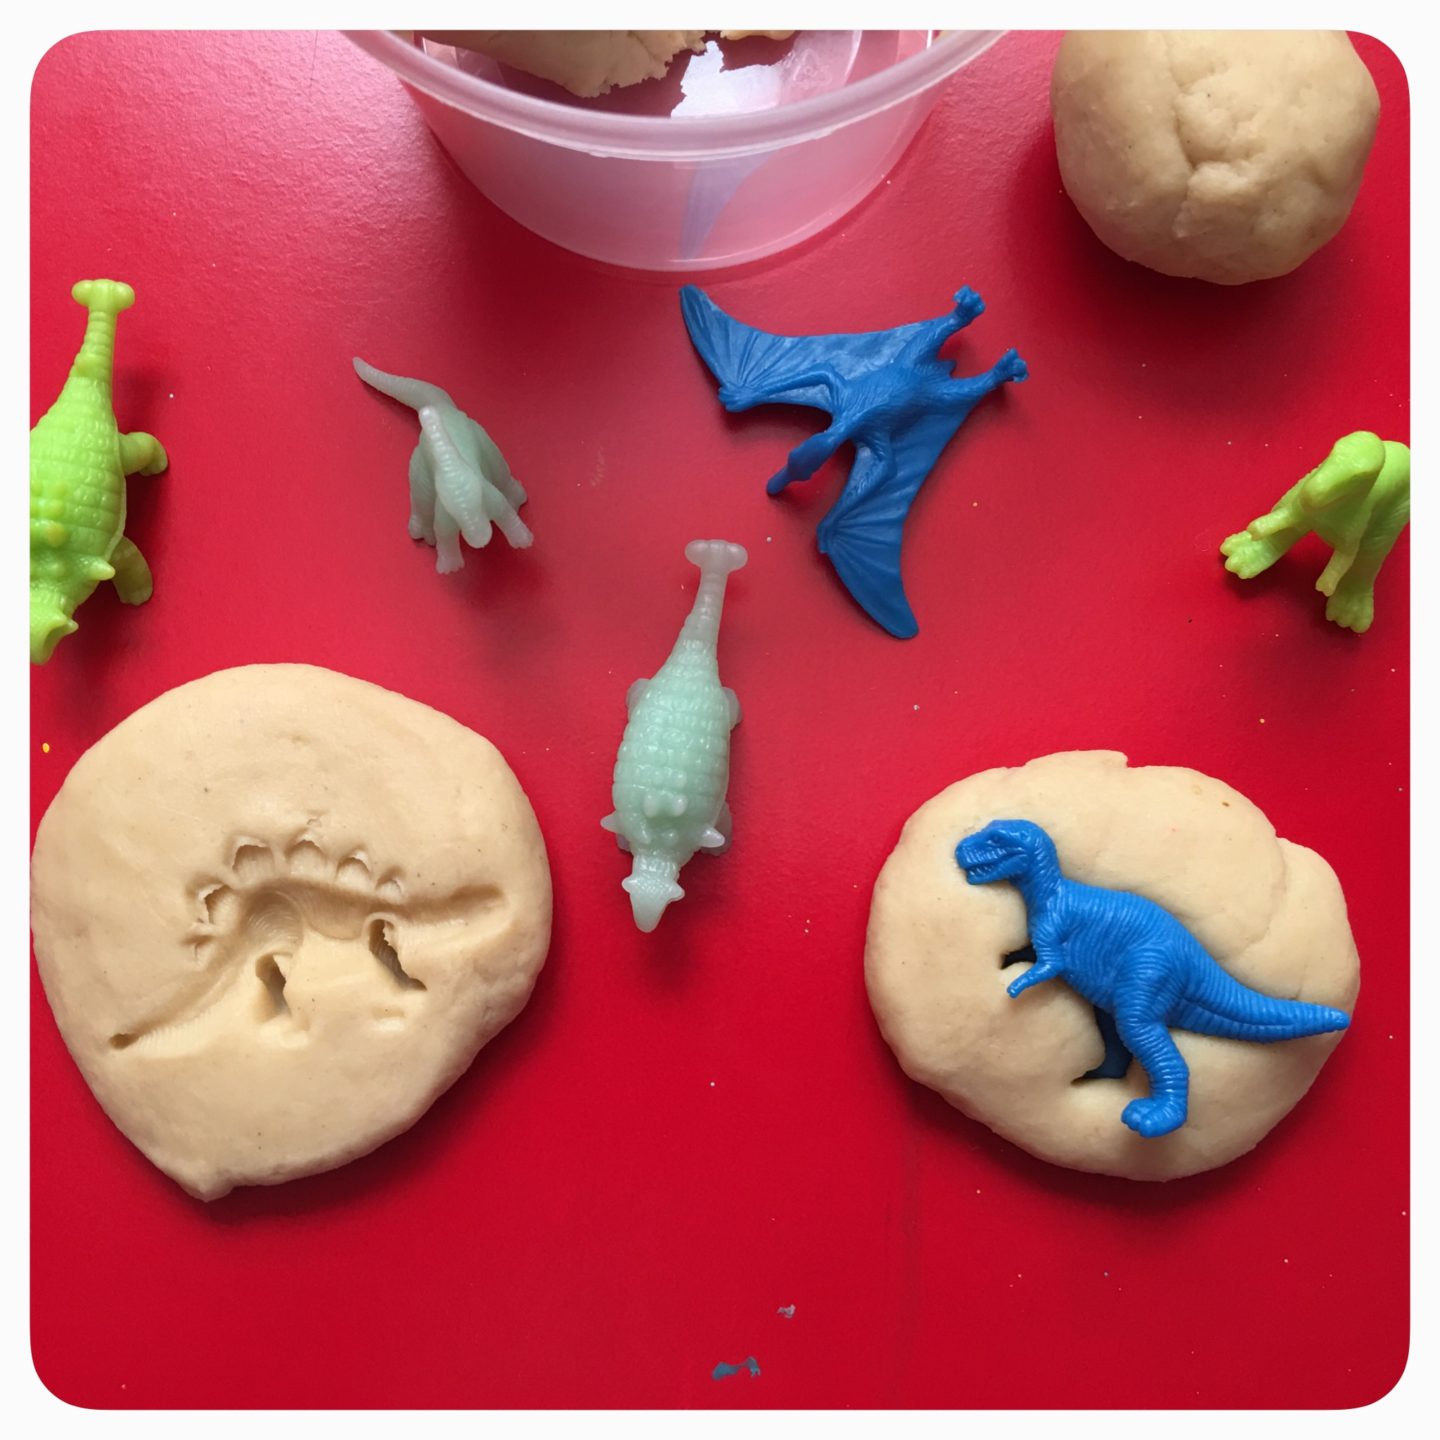 Creating simple play-dough invitations to play for exploring Dinosaurs.